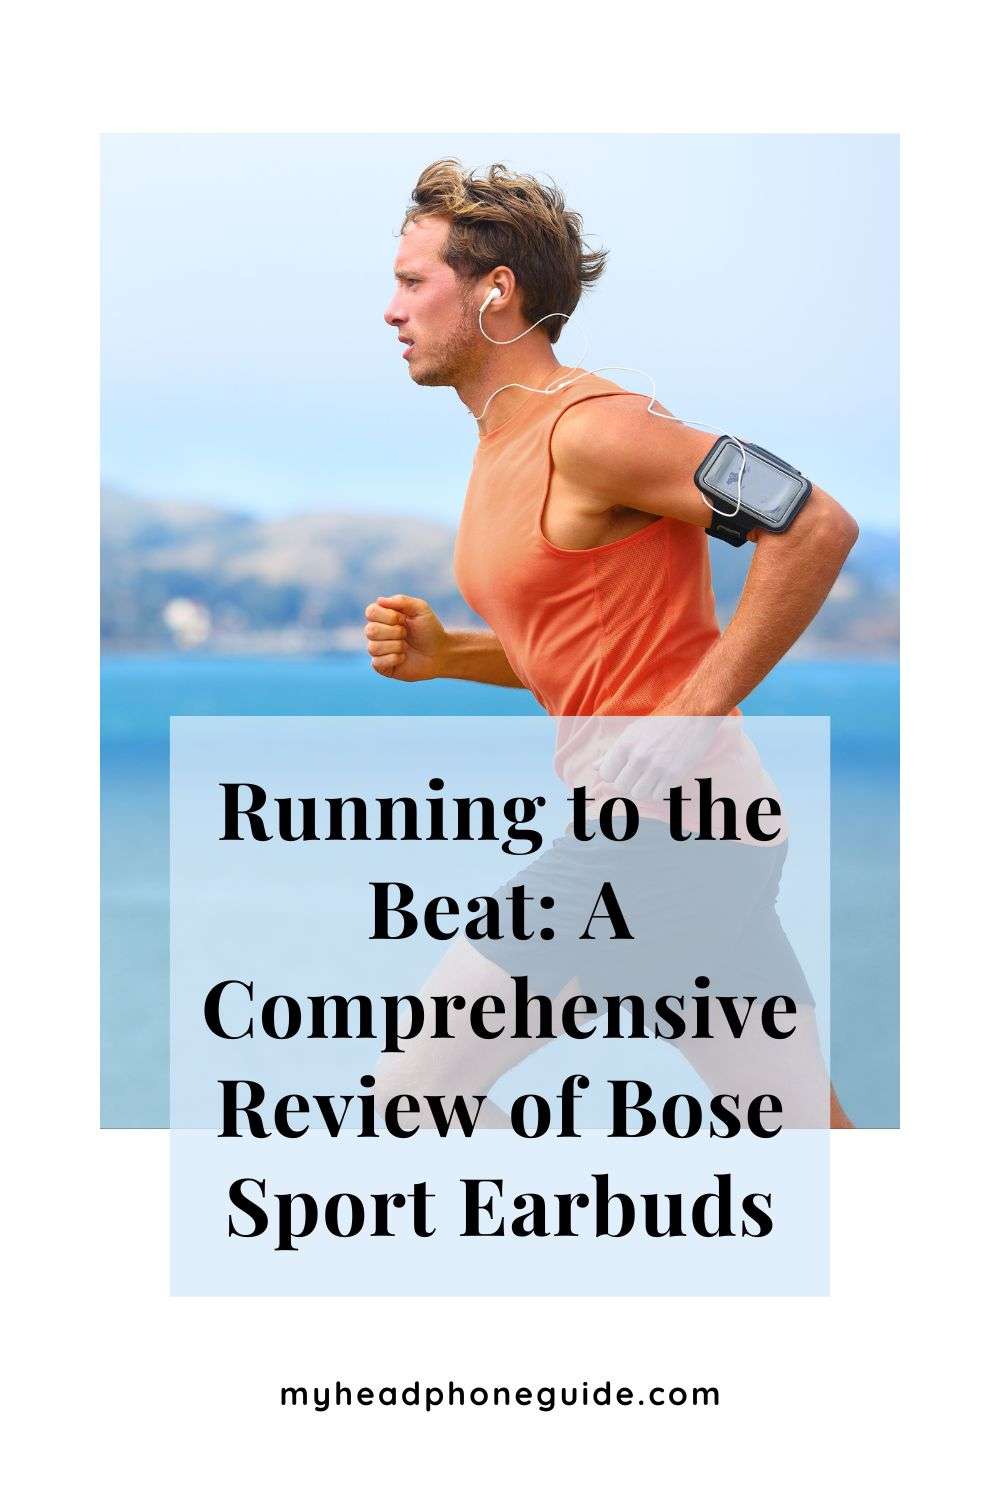 Bose Sport Earbuds for Running